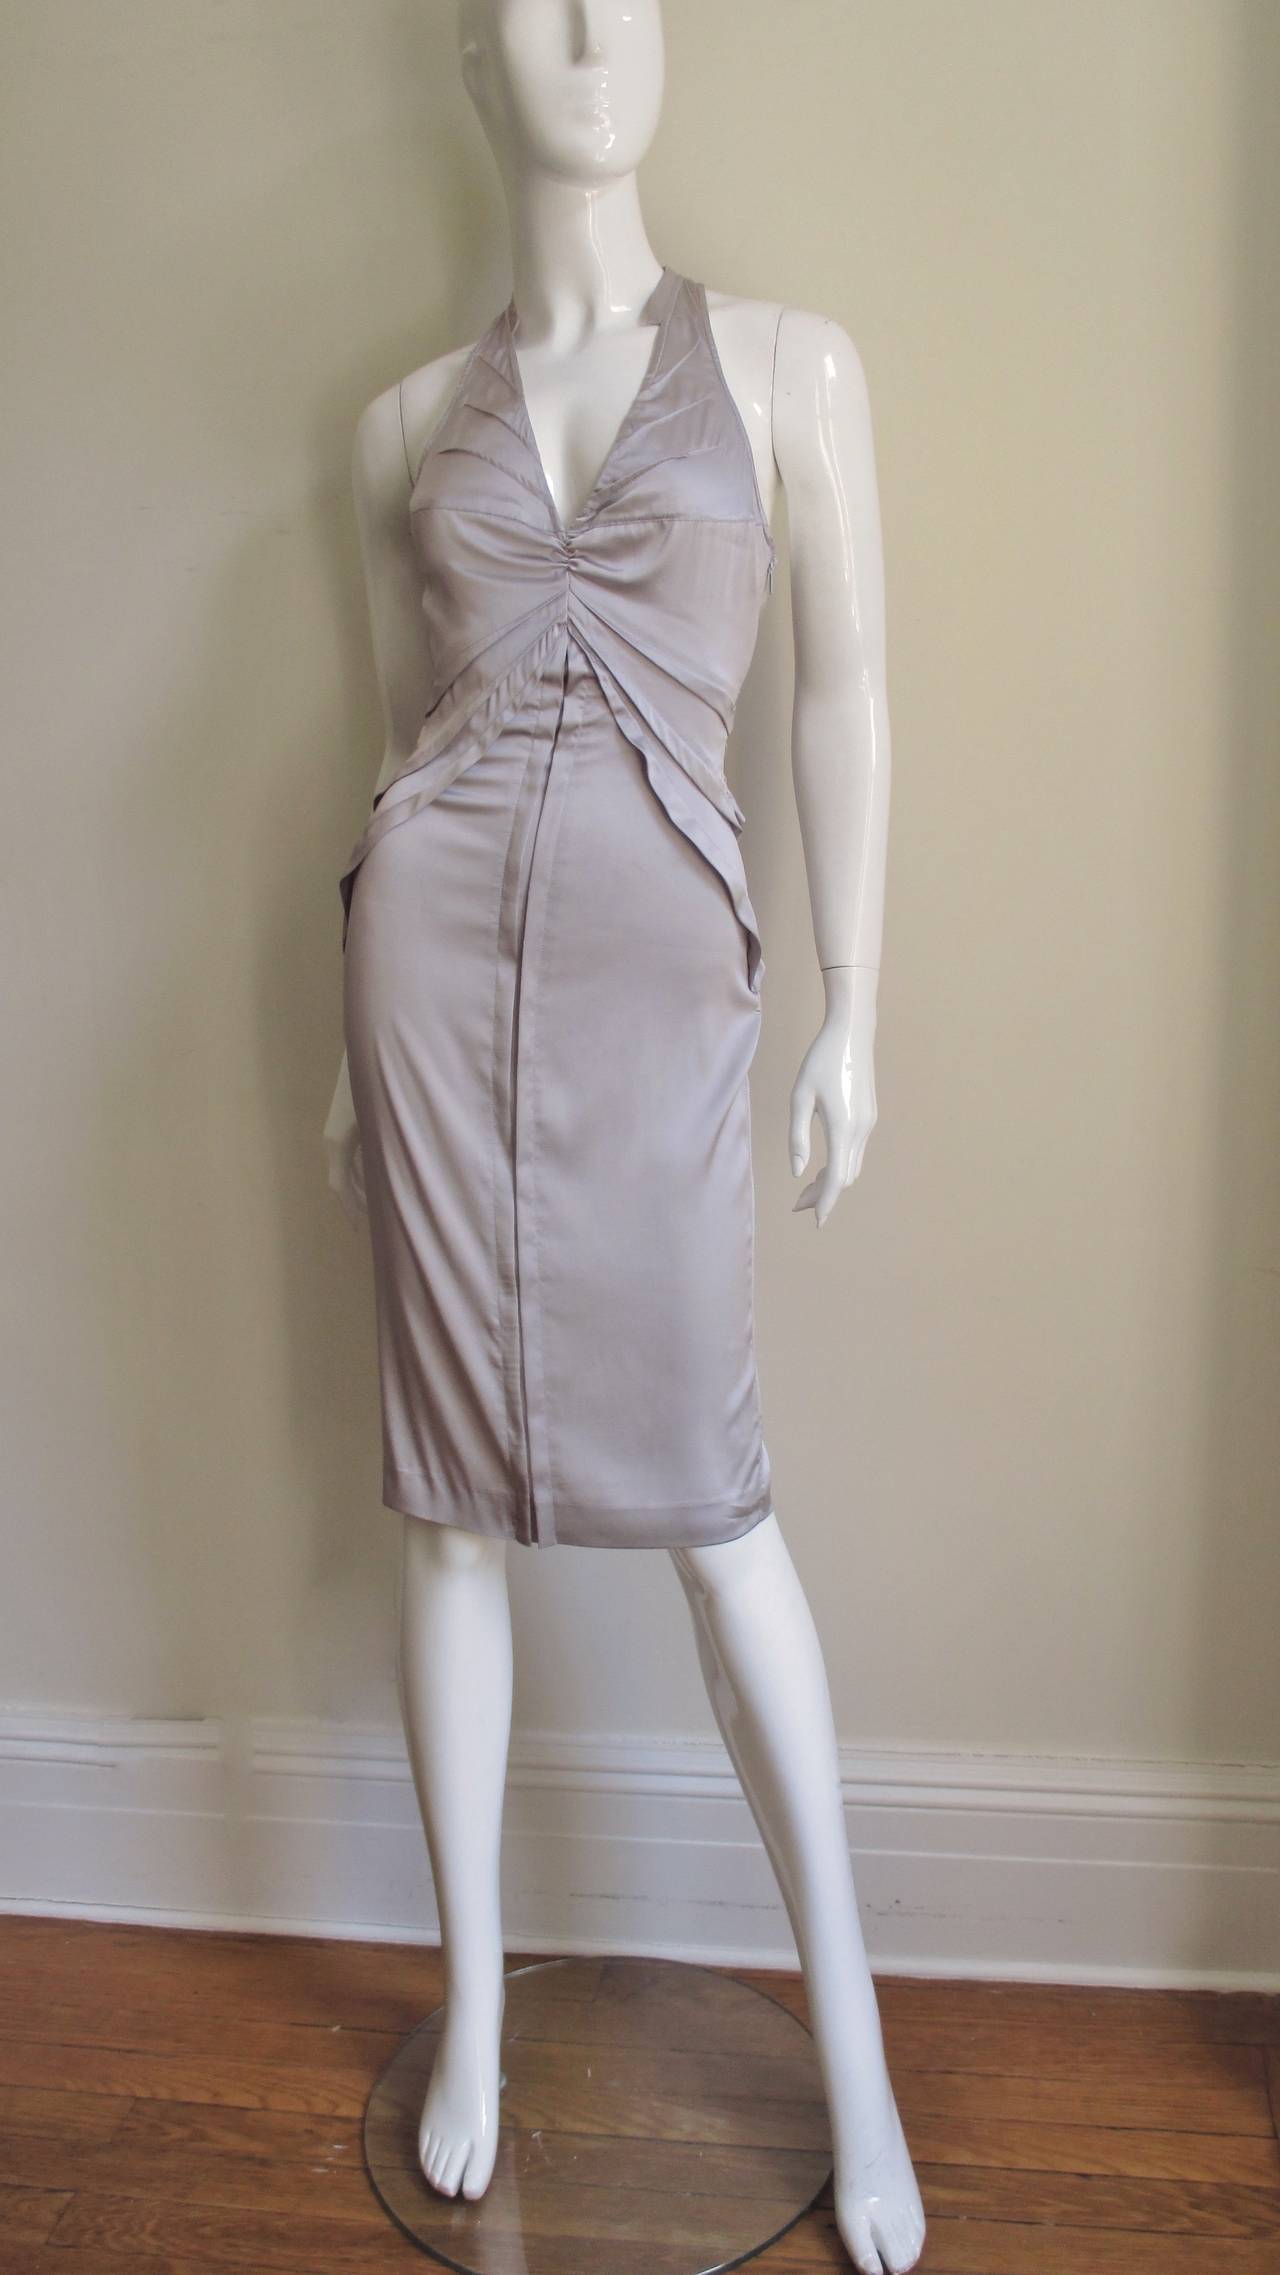 2003 Tom Ford Gucci Goreous Lavender Plunge Silk Dress For Sale at 1stdibs